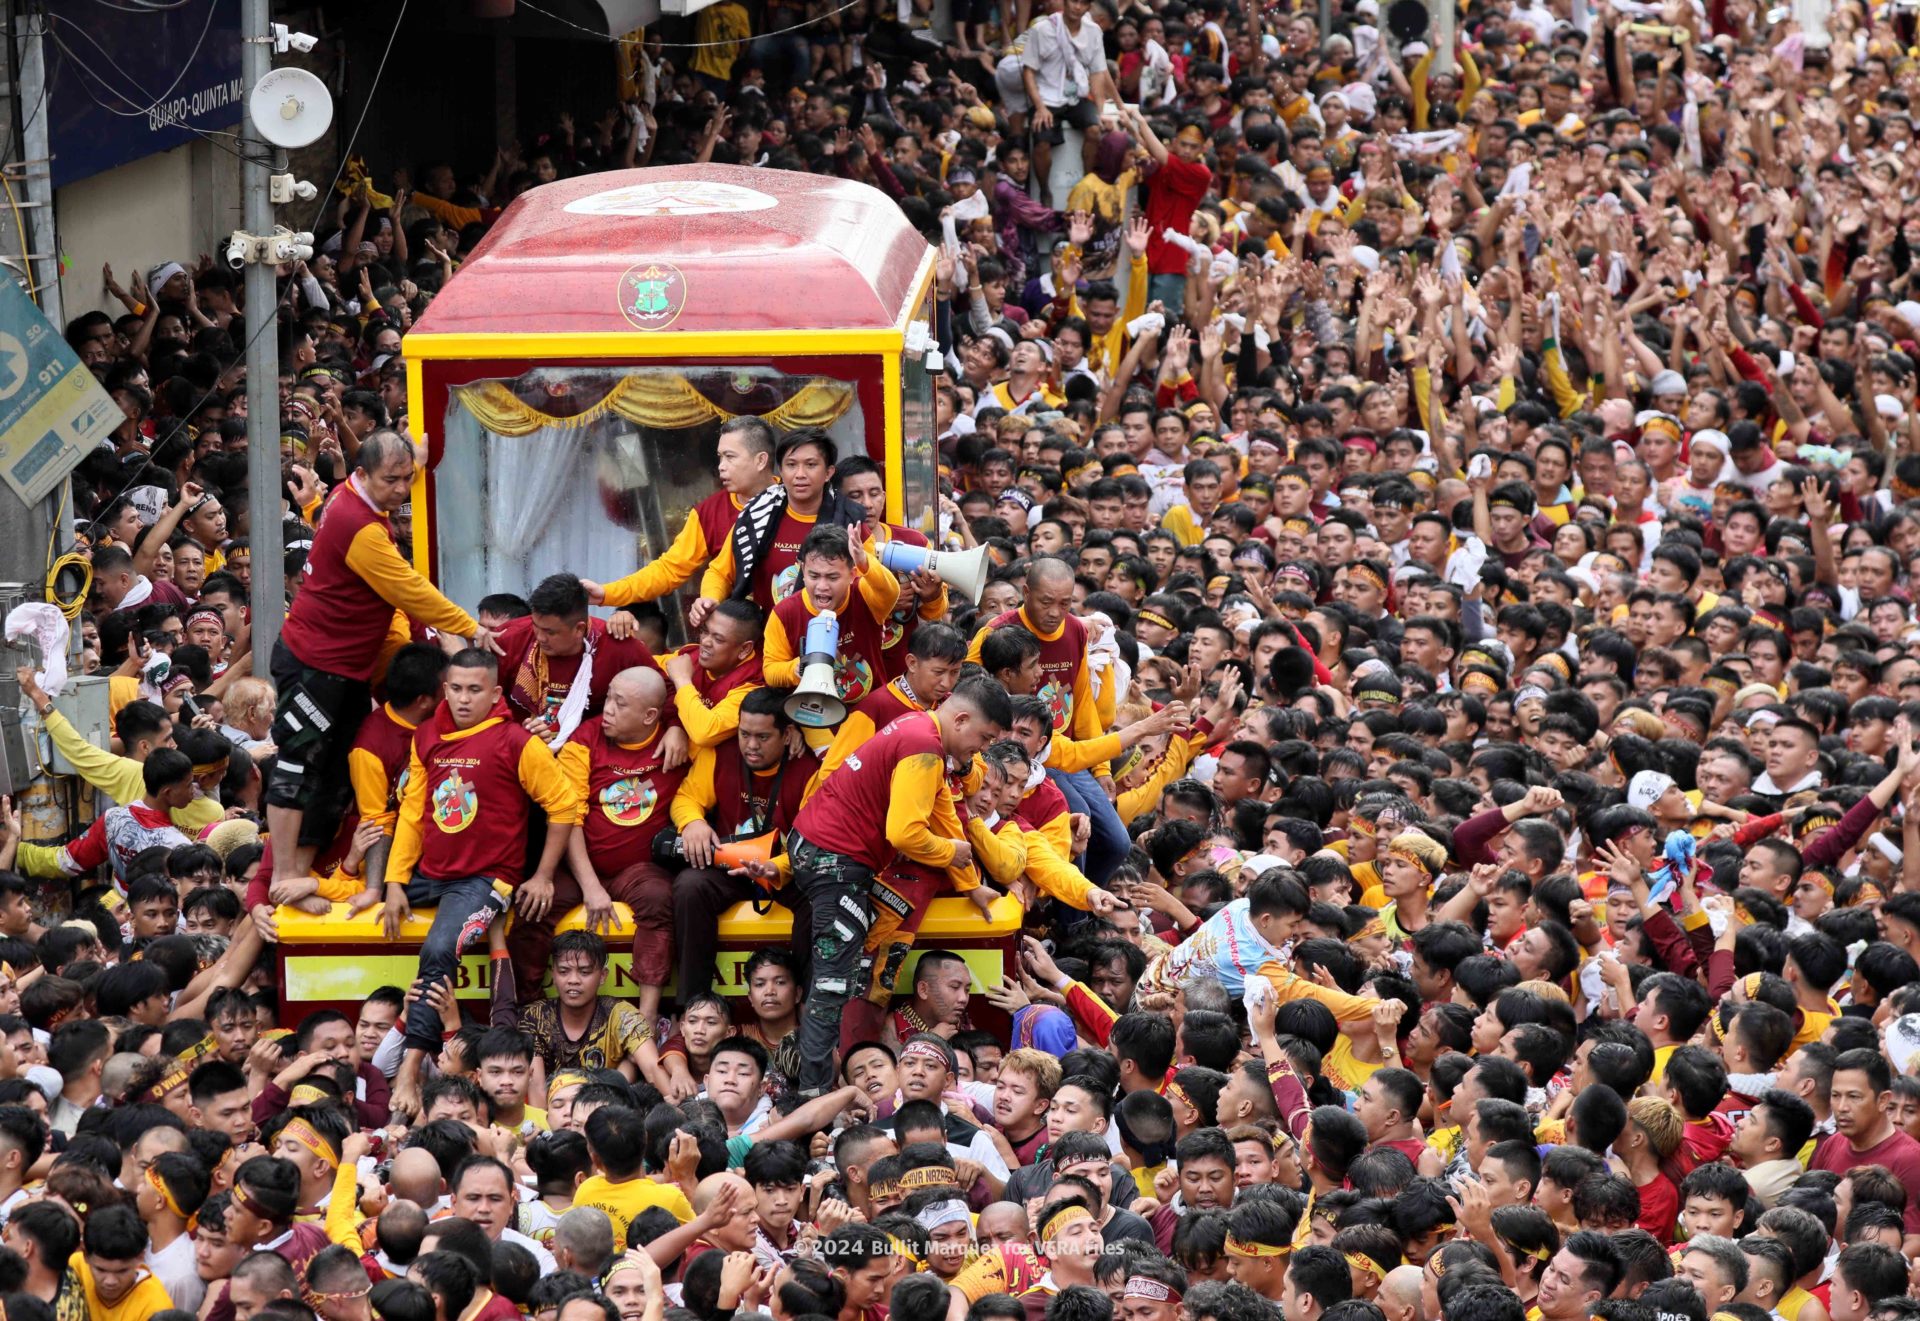 Traslacion 2024: A spectacular display Filipinos’ faith and piety By Bullit Marquez 4/15